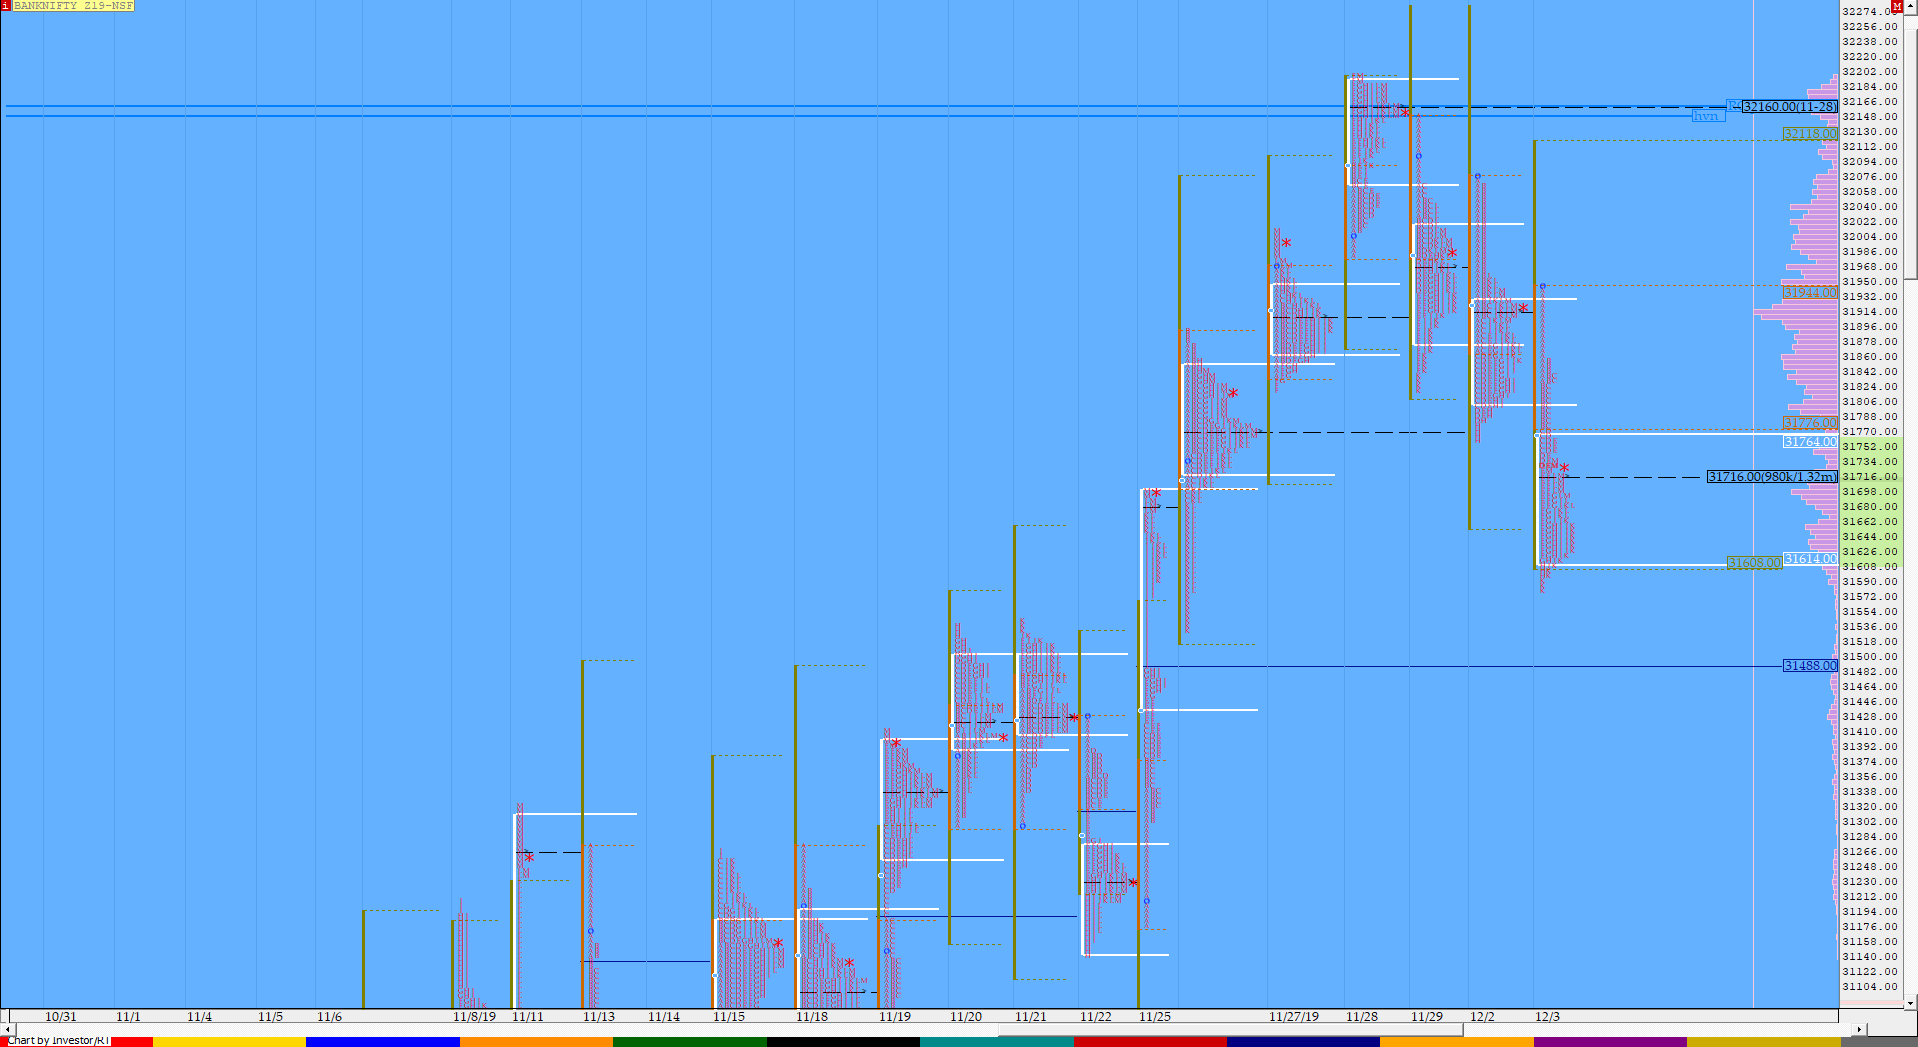 Bnf Compo1 2 Market Profile Analysis Dated 03Rd December Banknifty Futures, Charts, Day Trading, Intraday Trading, Intraday Trading Strategies, Market Profile, Market Profile Trading Strategies, Nifty Futures, Order Flow Analysis, Support And Resistance, Technical Analysis, Trading Strategies, Volume Profile Trading